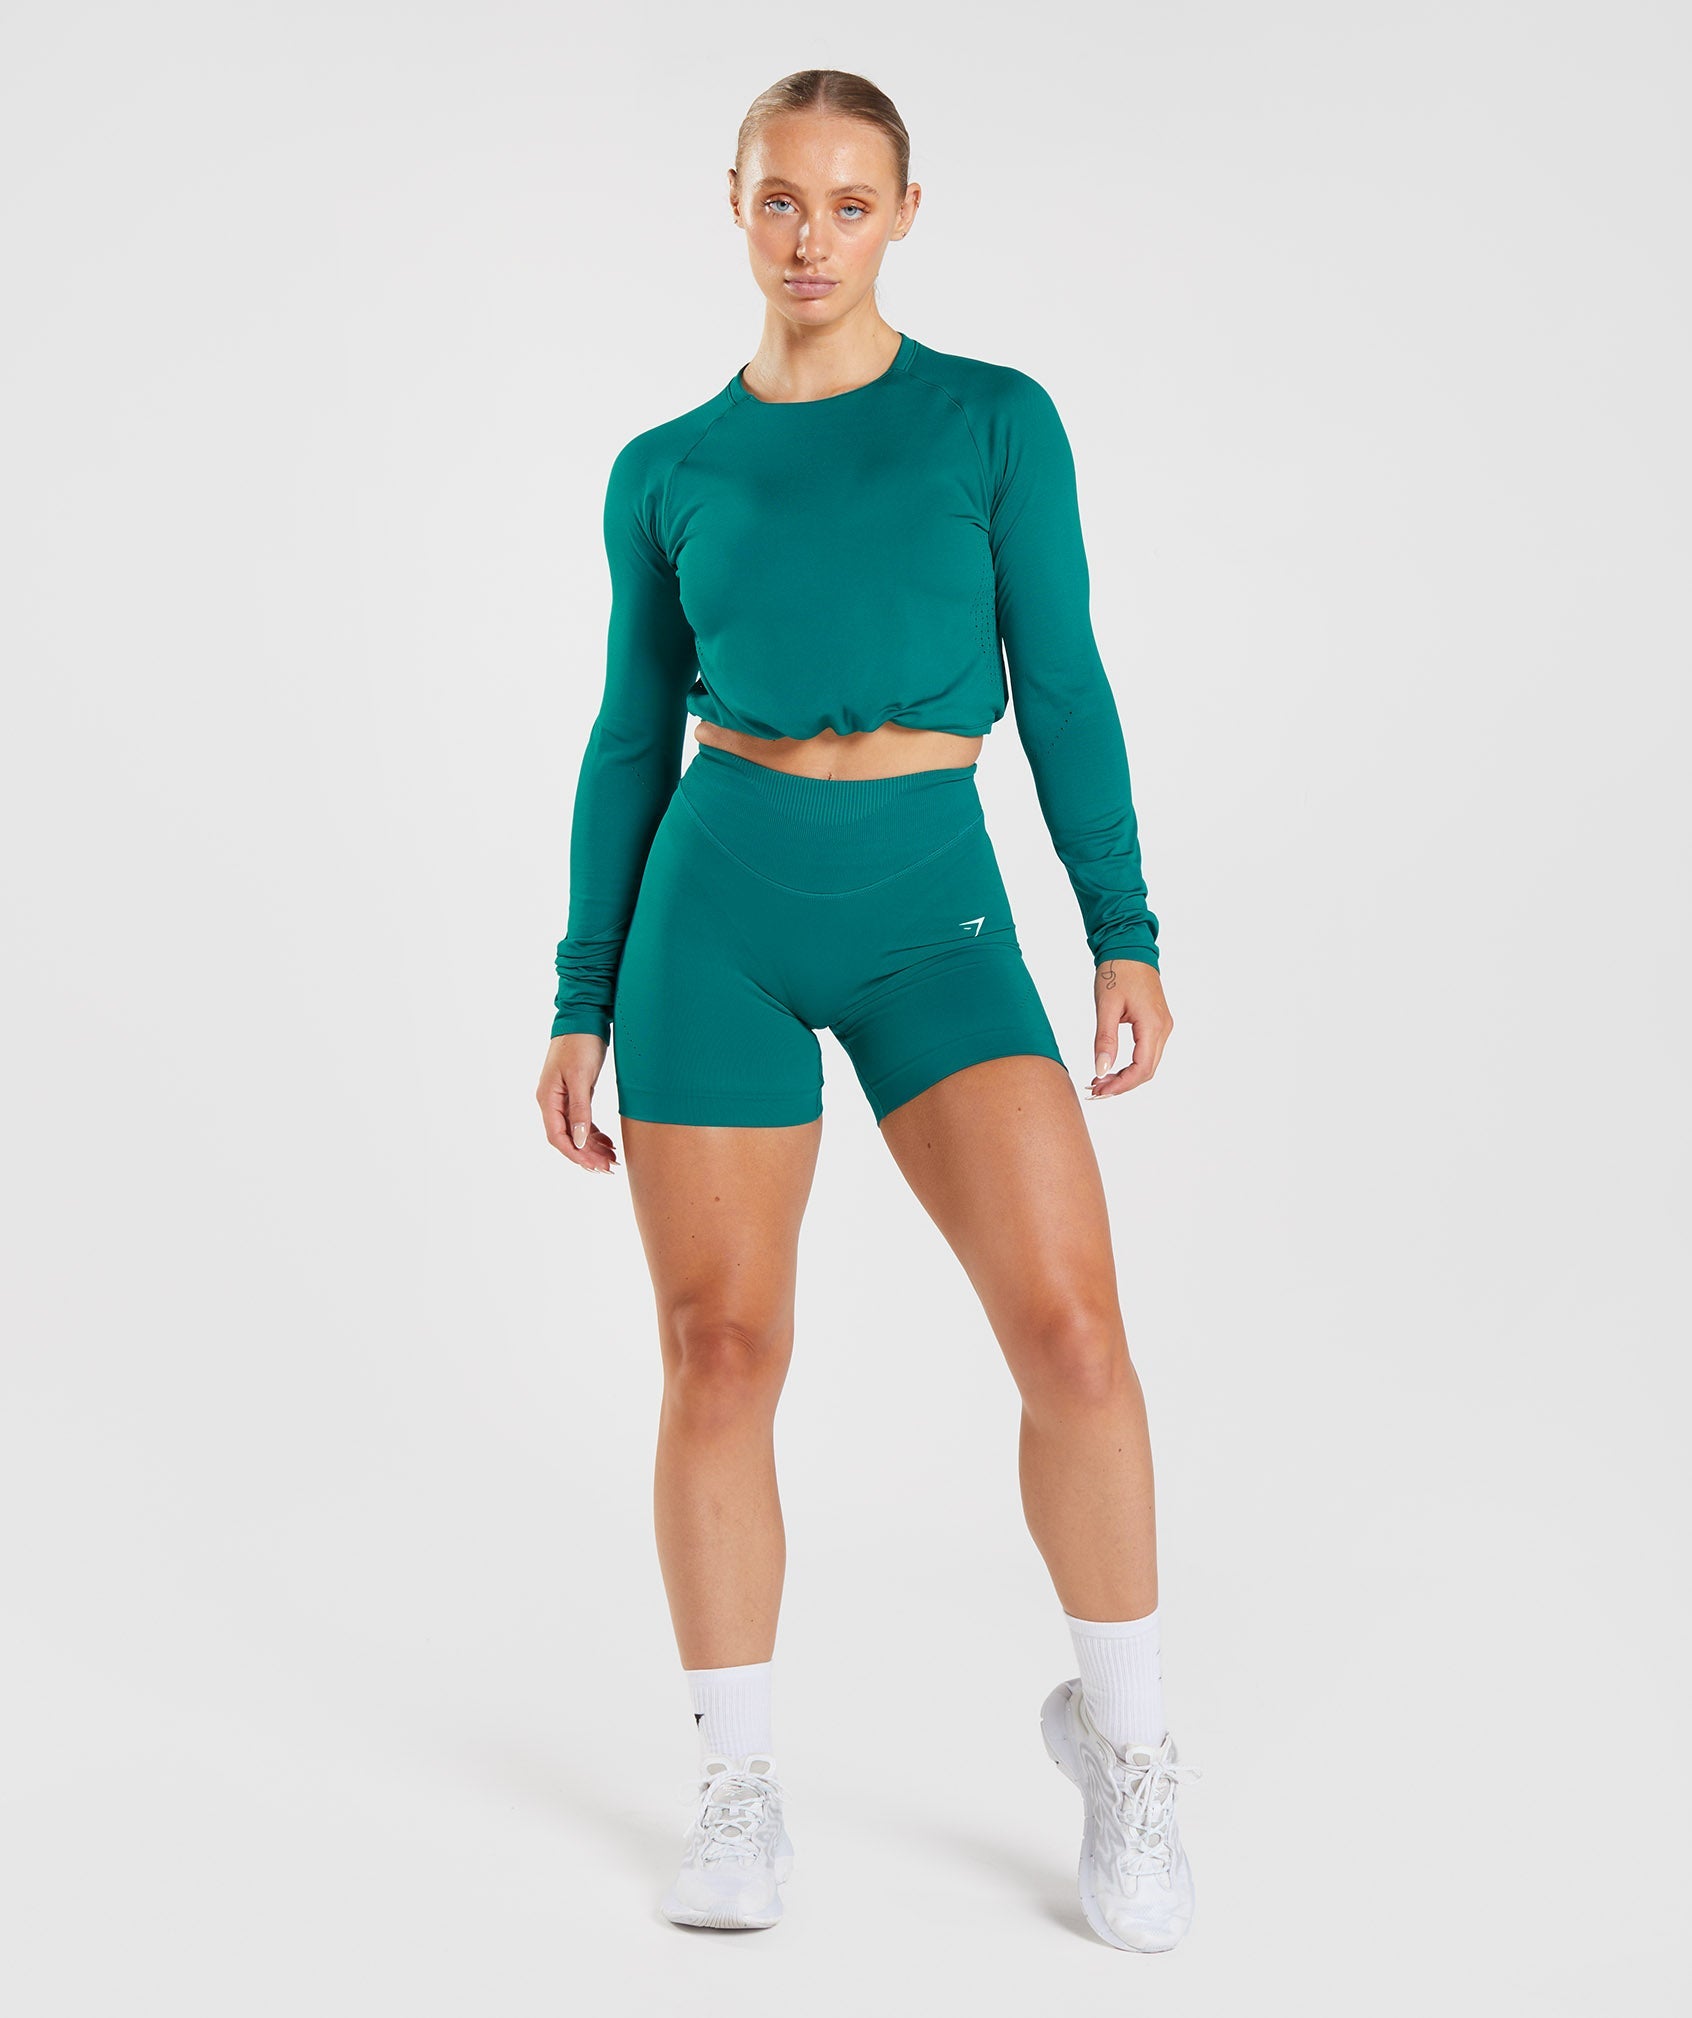 Gymshark x Whitney Simmons collection long sleeve V1 crop top size small